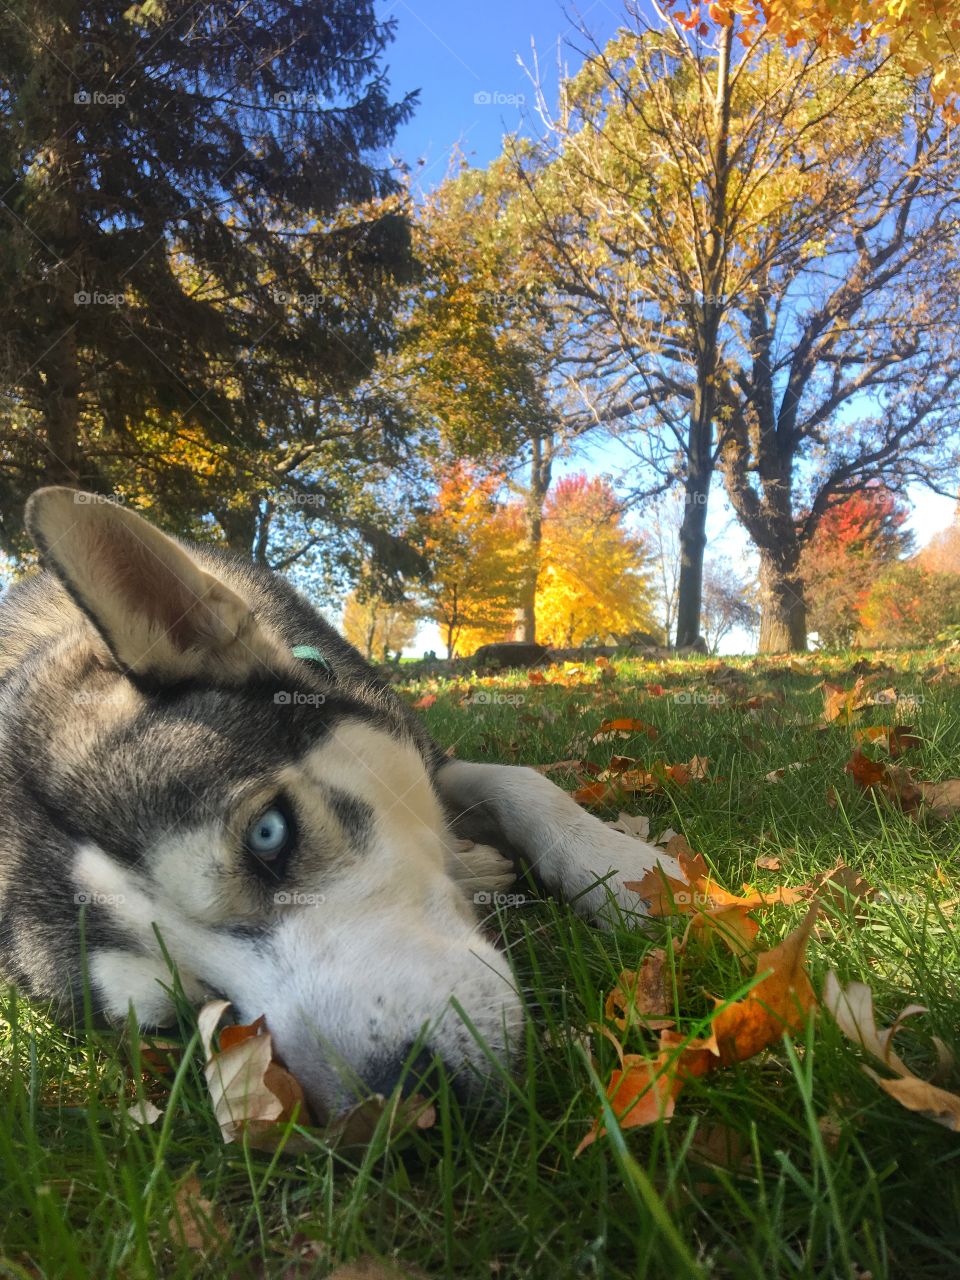 Fall relaxation 